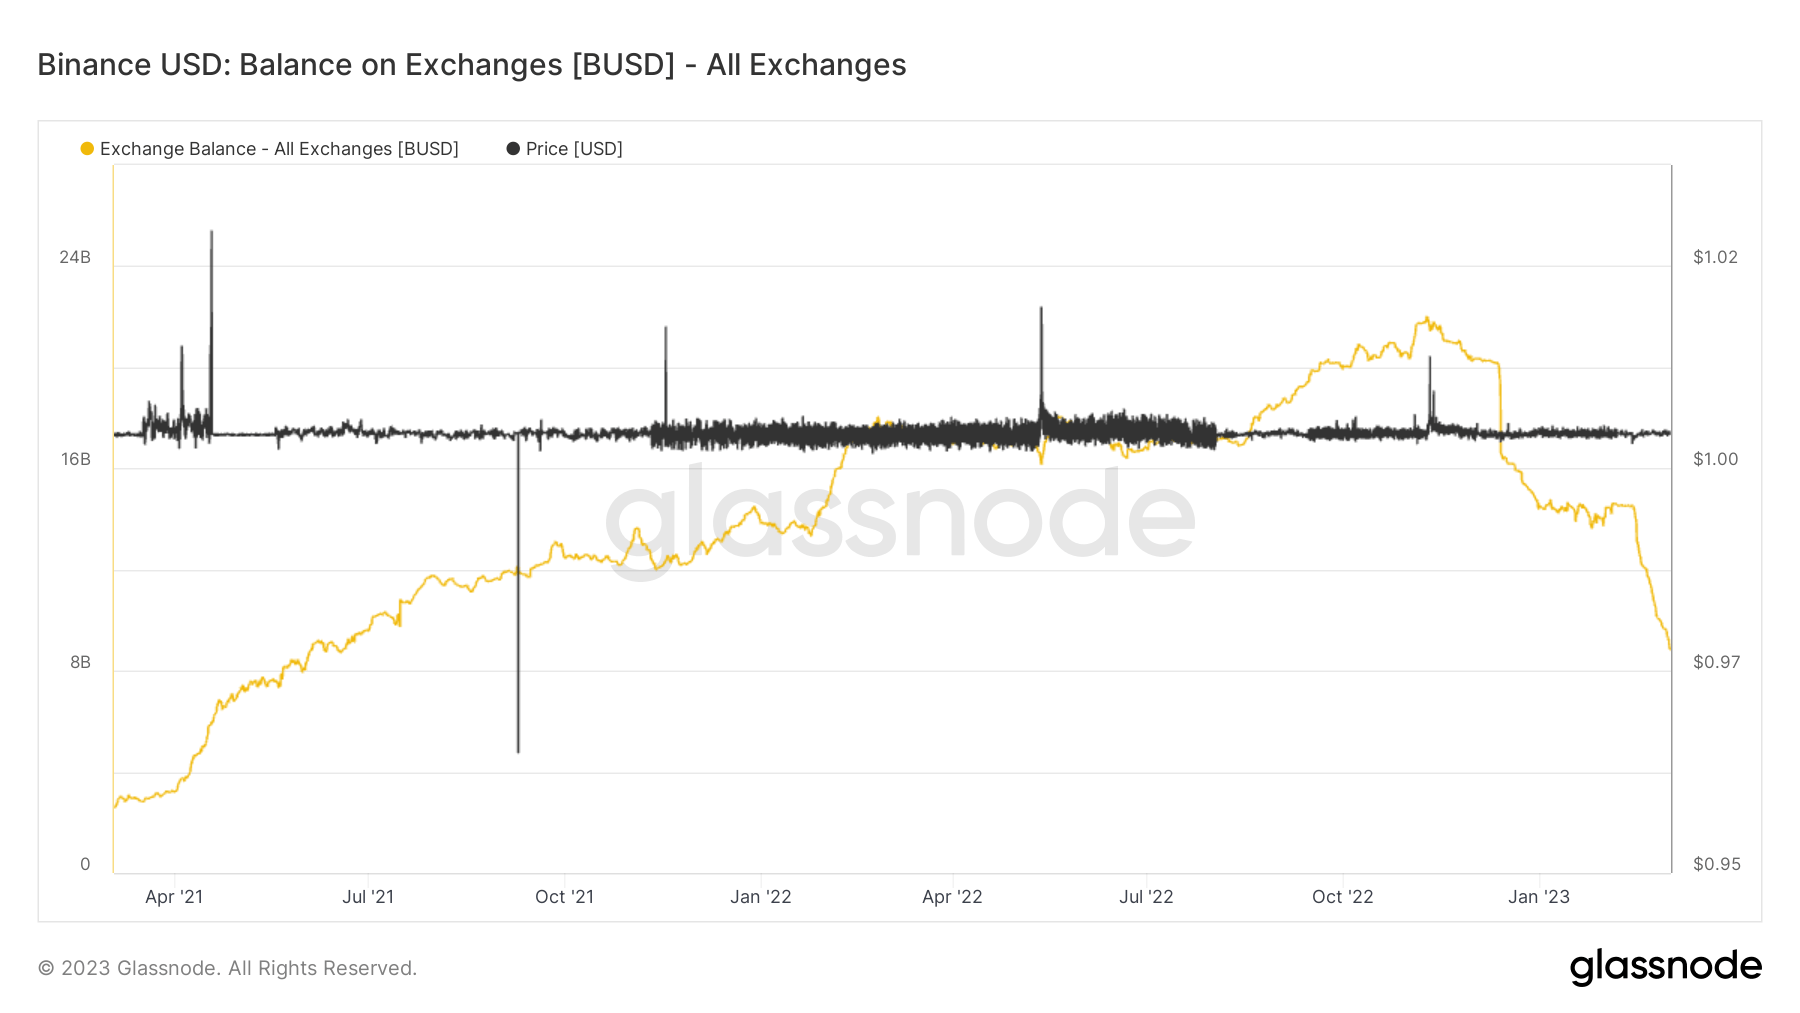 BUSD balance on all exchanges (Source: Glassnode)